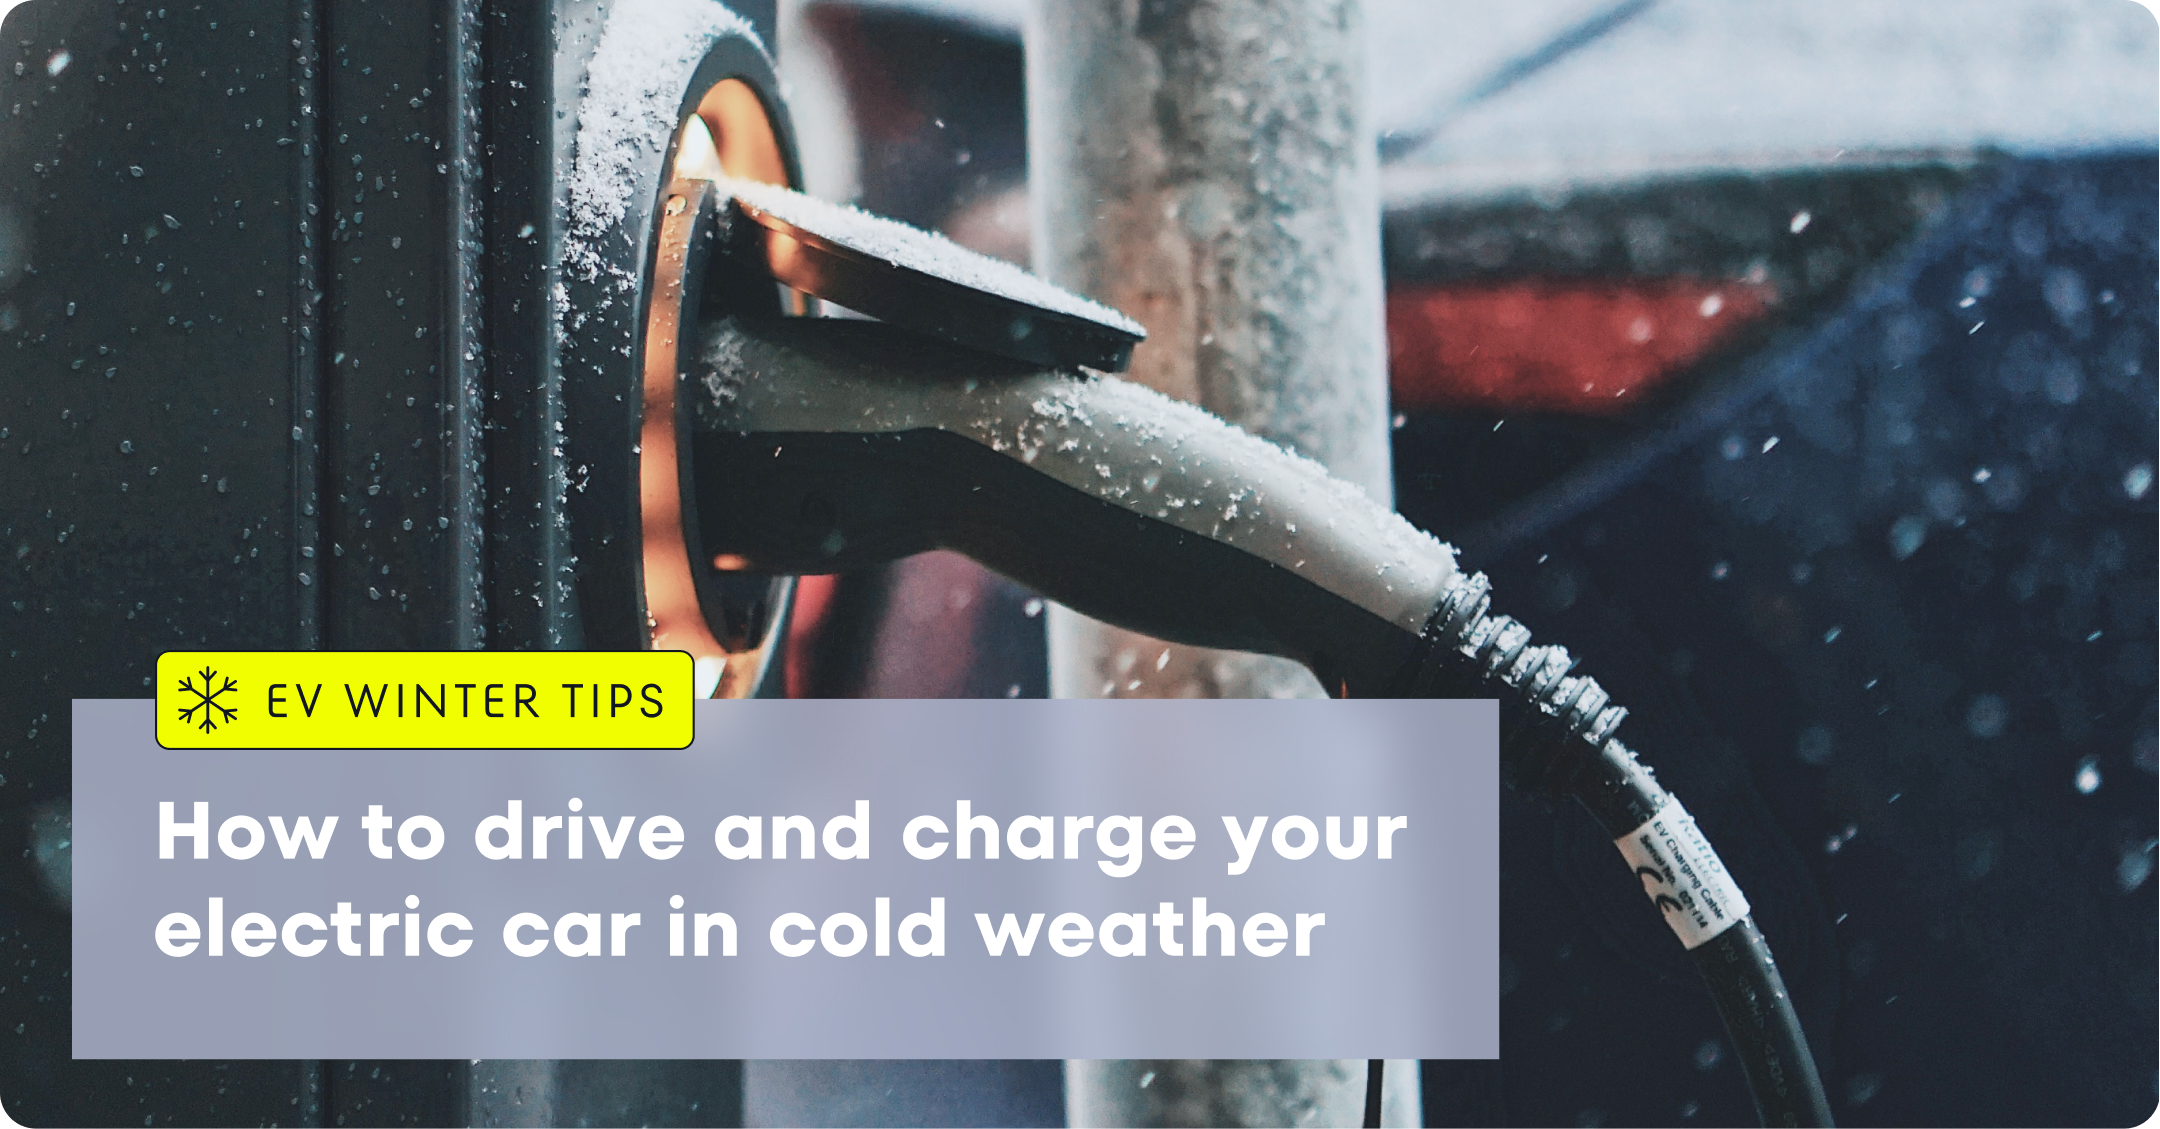 EV winter tips - How to drive and charge your electric car in cold weather